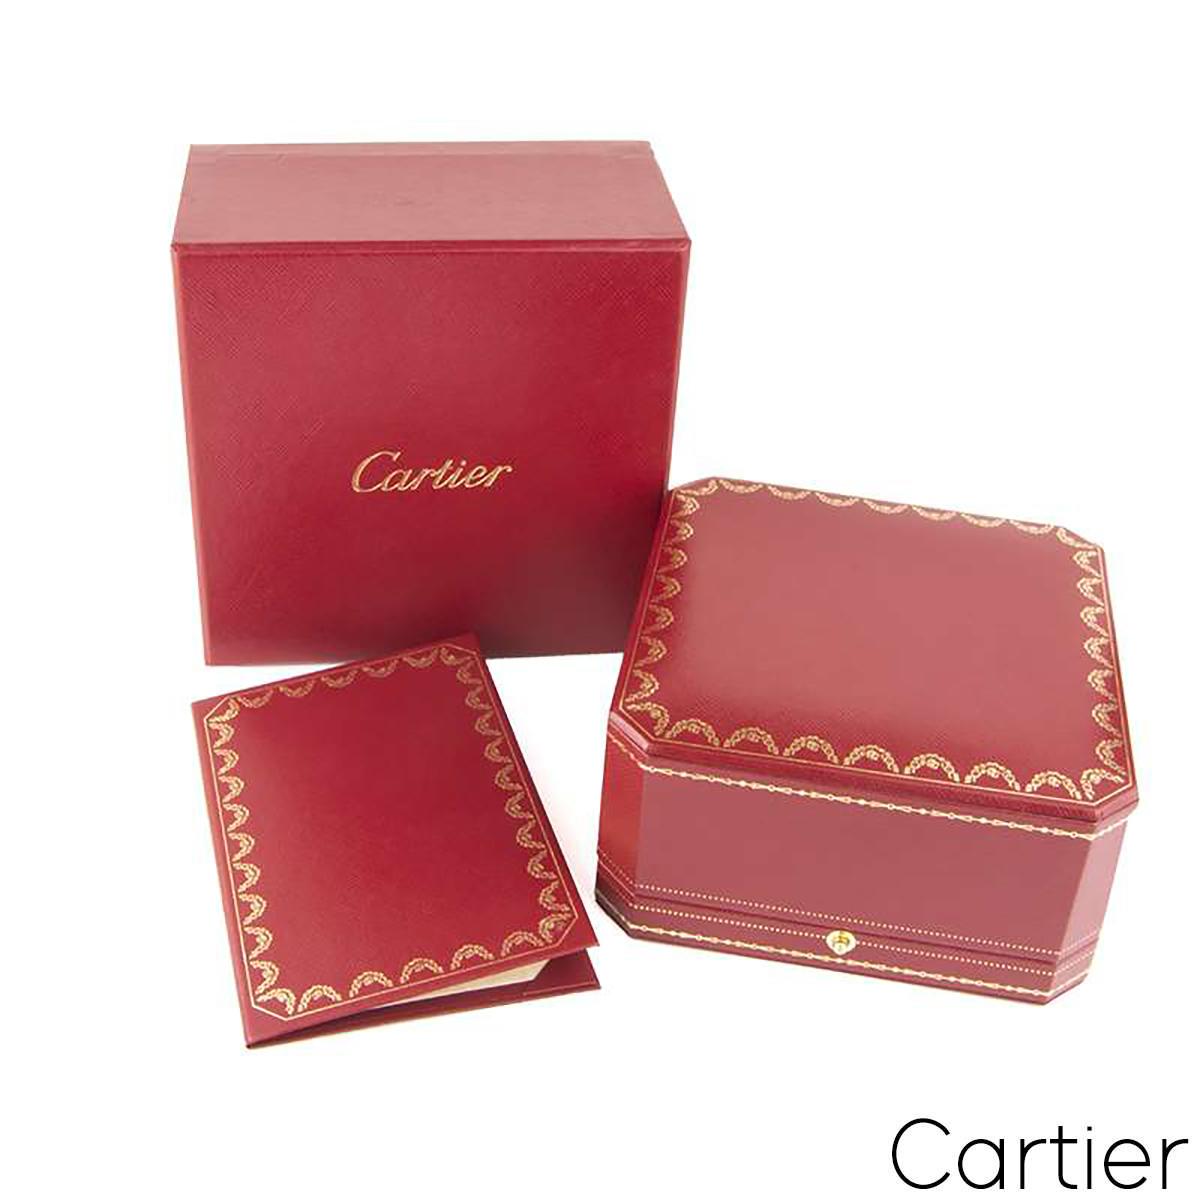 cartier ring sizes